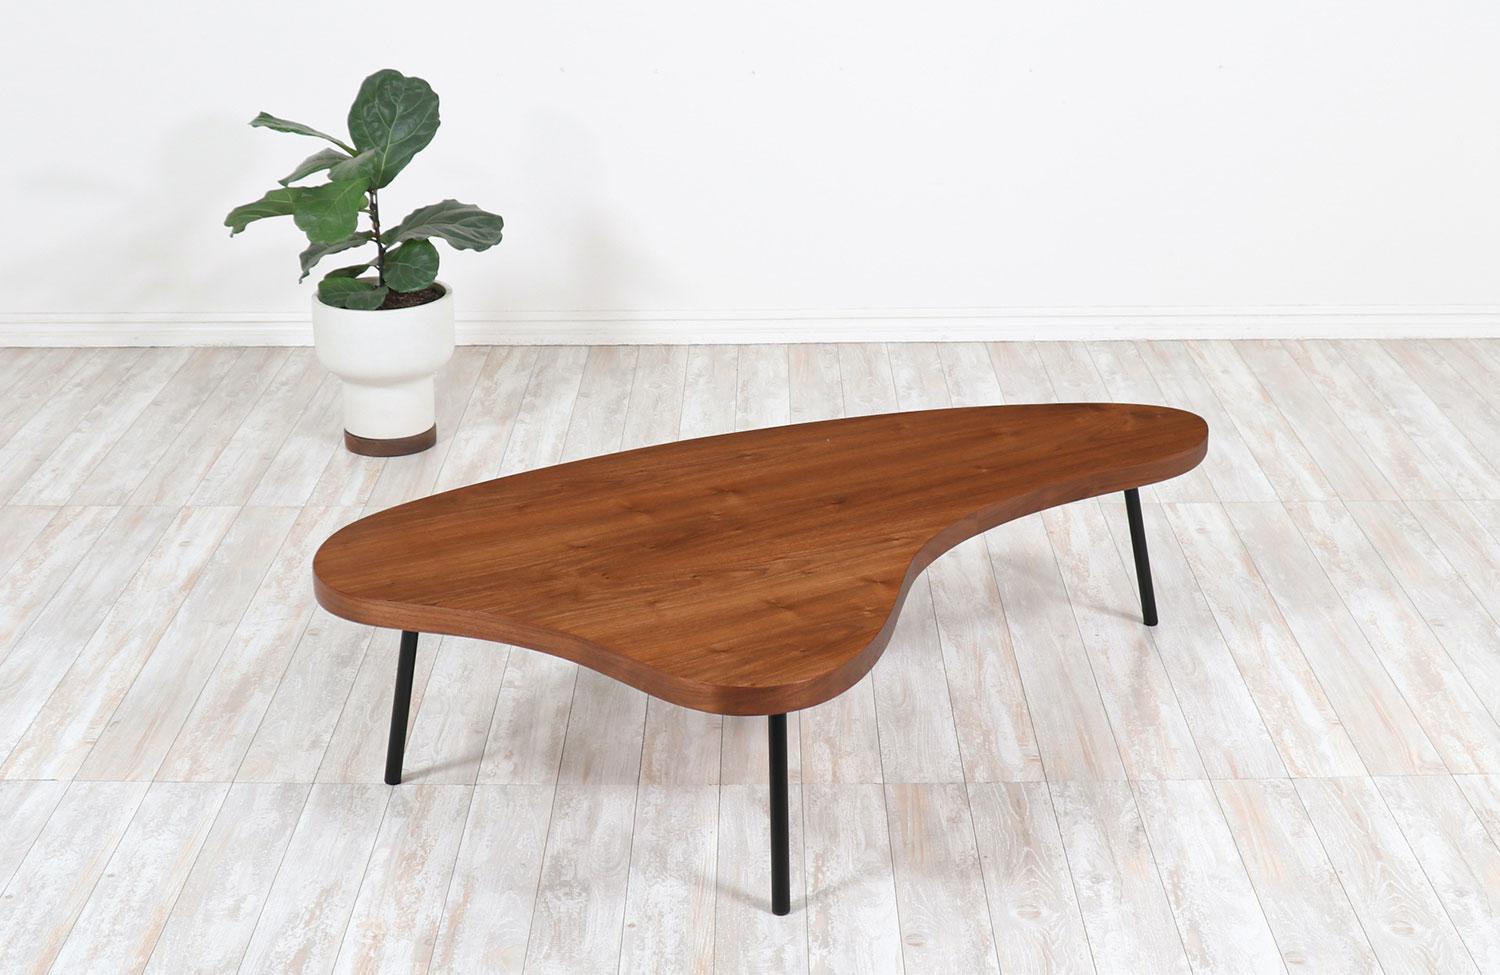 Vintage modern free-form coffee table designed and manufactured by Vista of California in the United States during the 1950s. Our minimalist Mid-Century Modern table features a beautiful and walnut top with an organic shape for a stunning grain